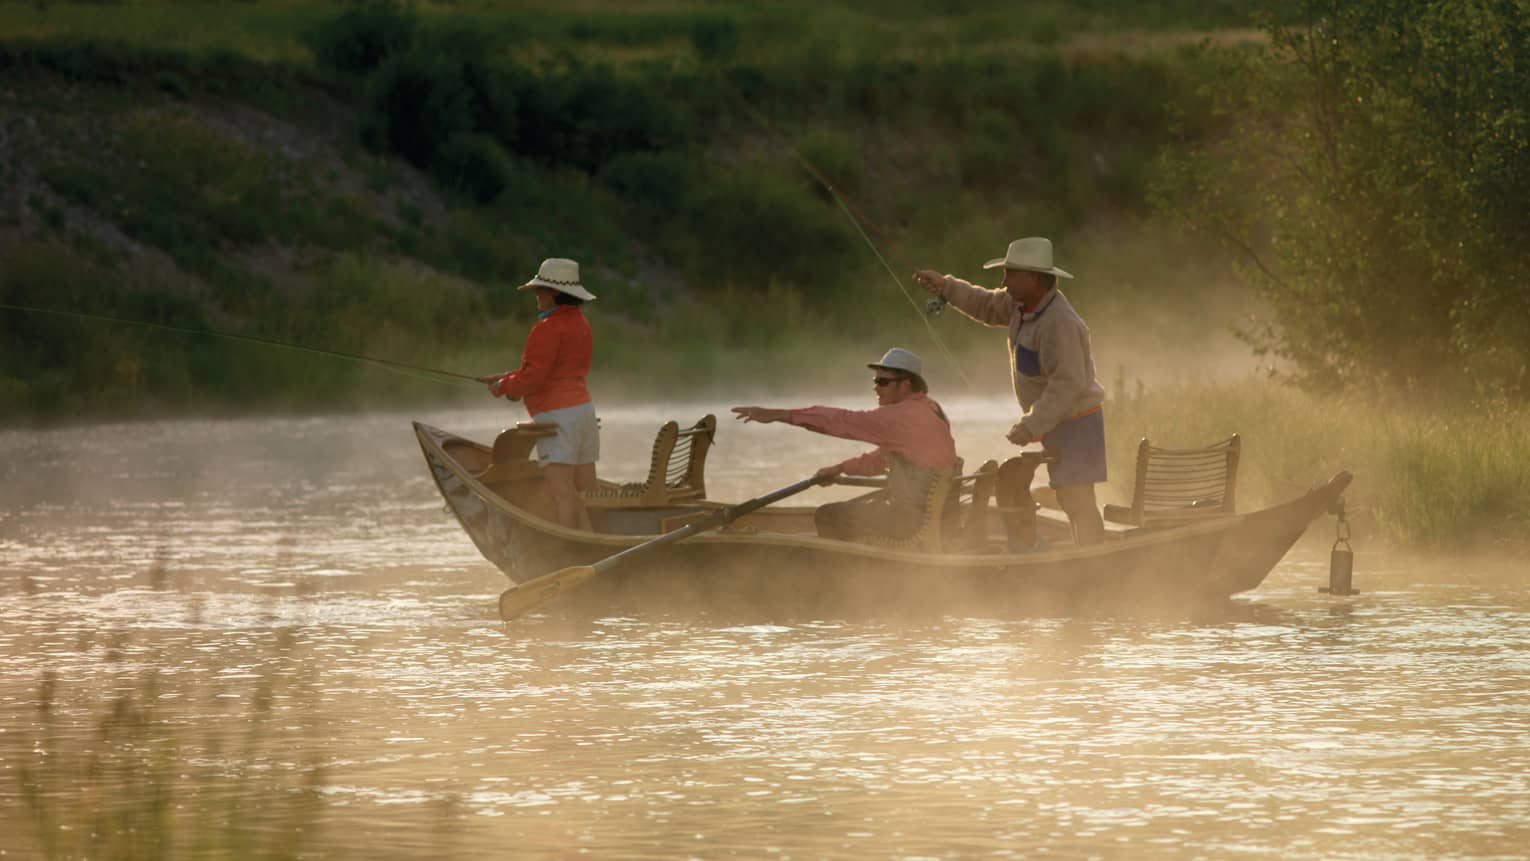 Mist rises from river over three people in fishing boat, one pointing to water